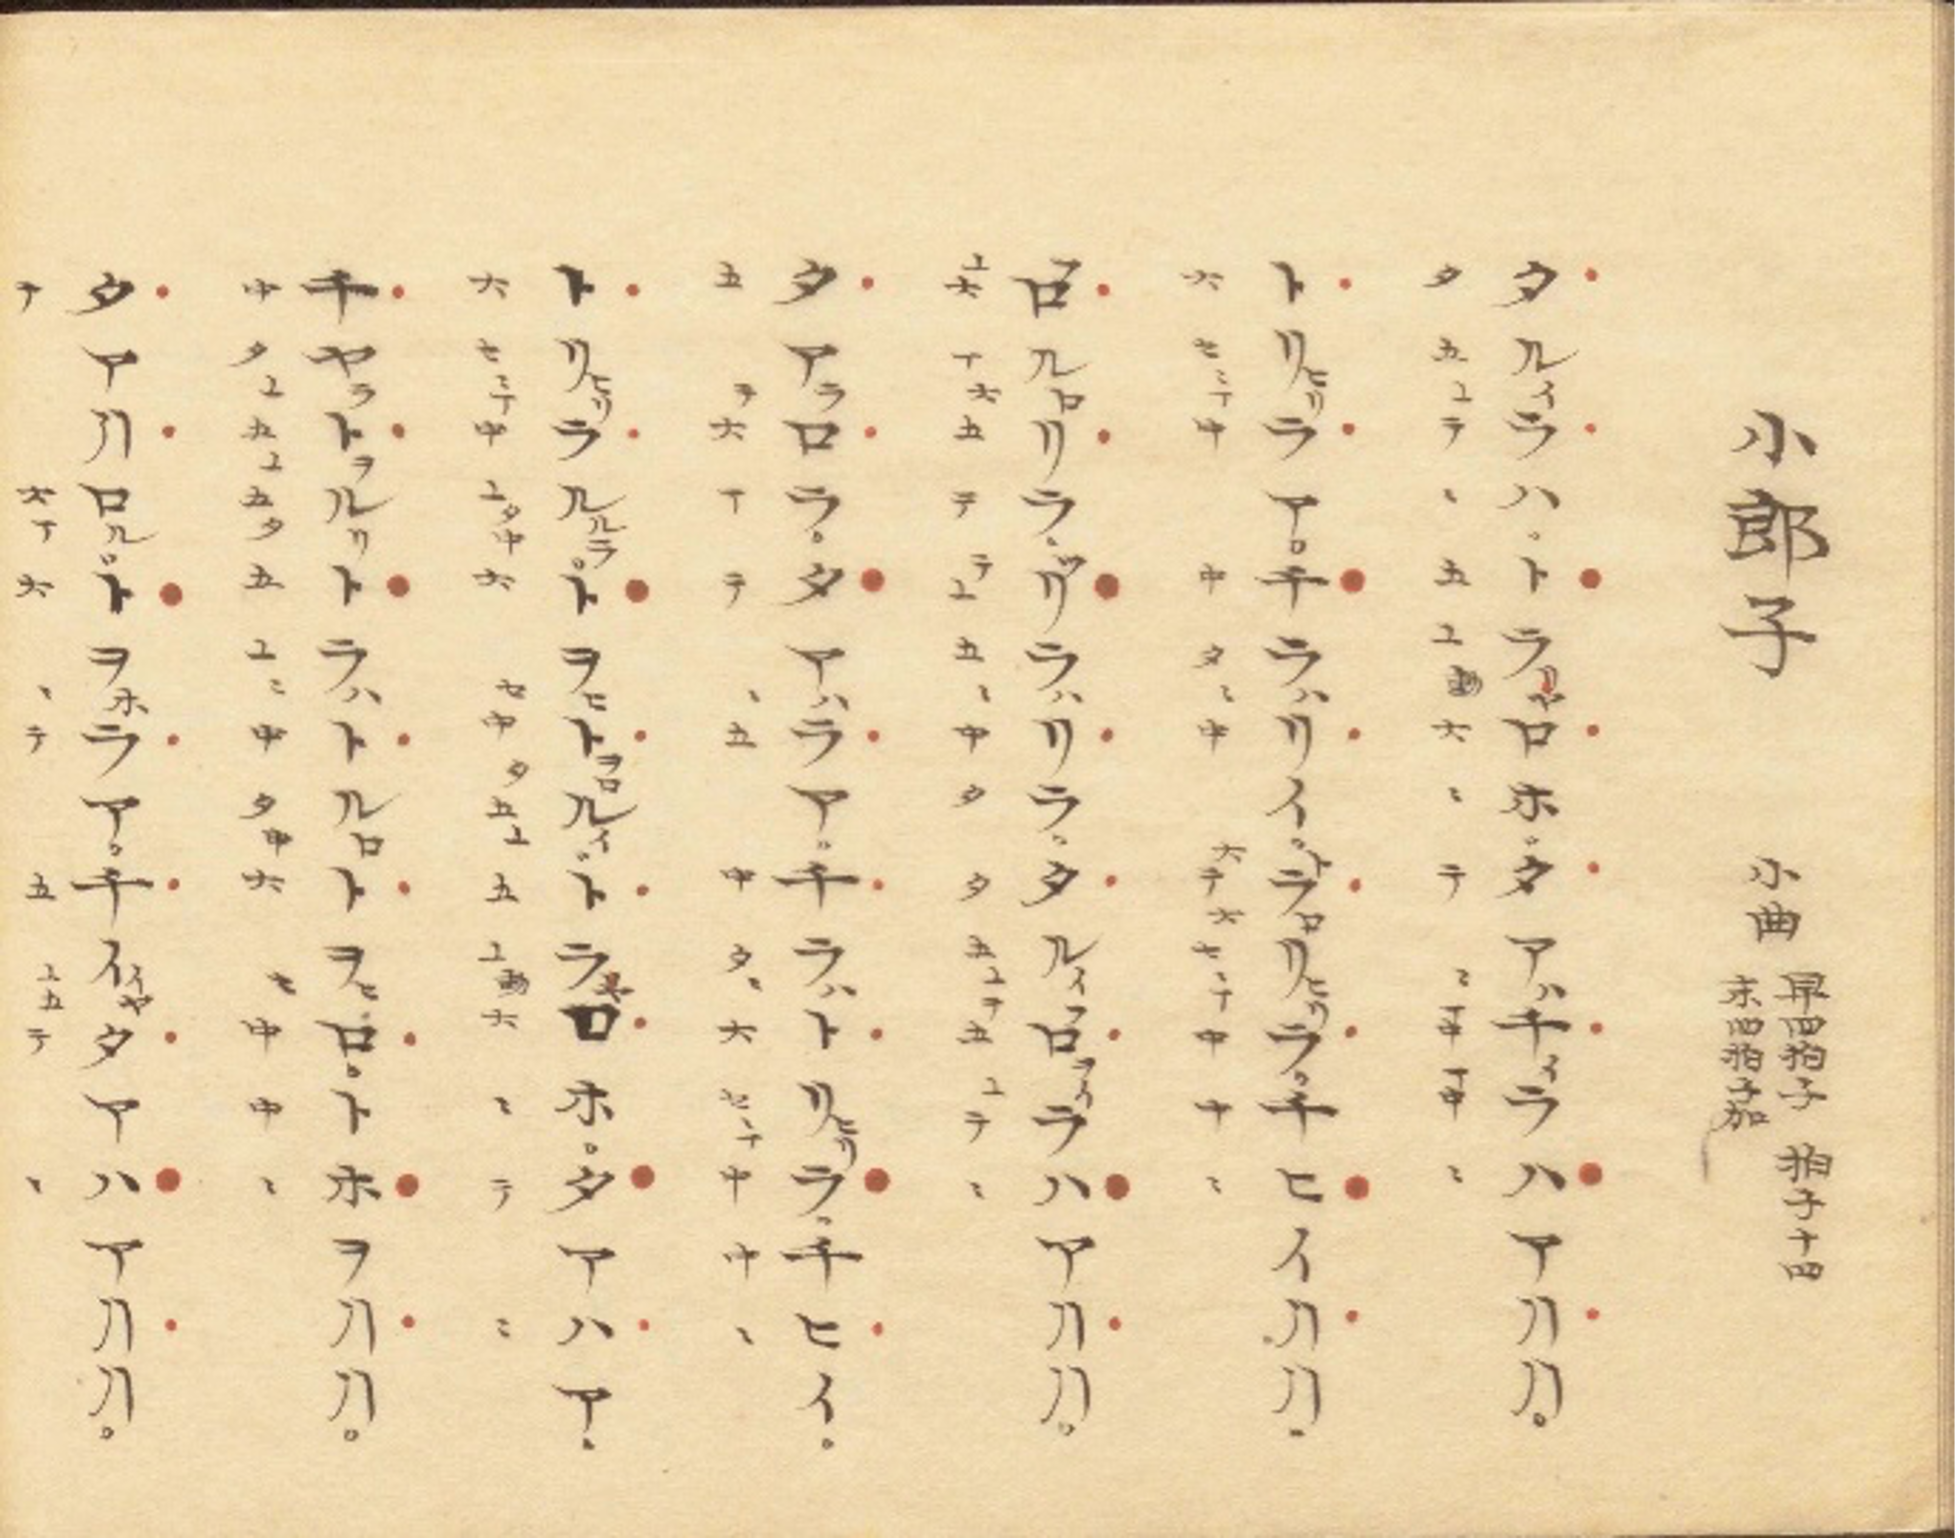 Fig. 1: Examples of Gagaku Score for Shō (Available at https://kokusho.nijl.ac.jp/biblio/100376839/717)